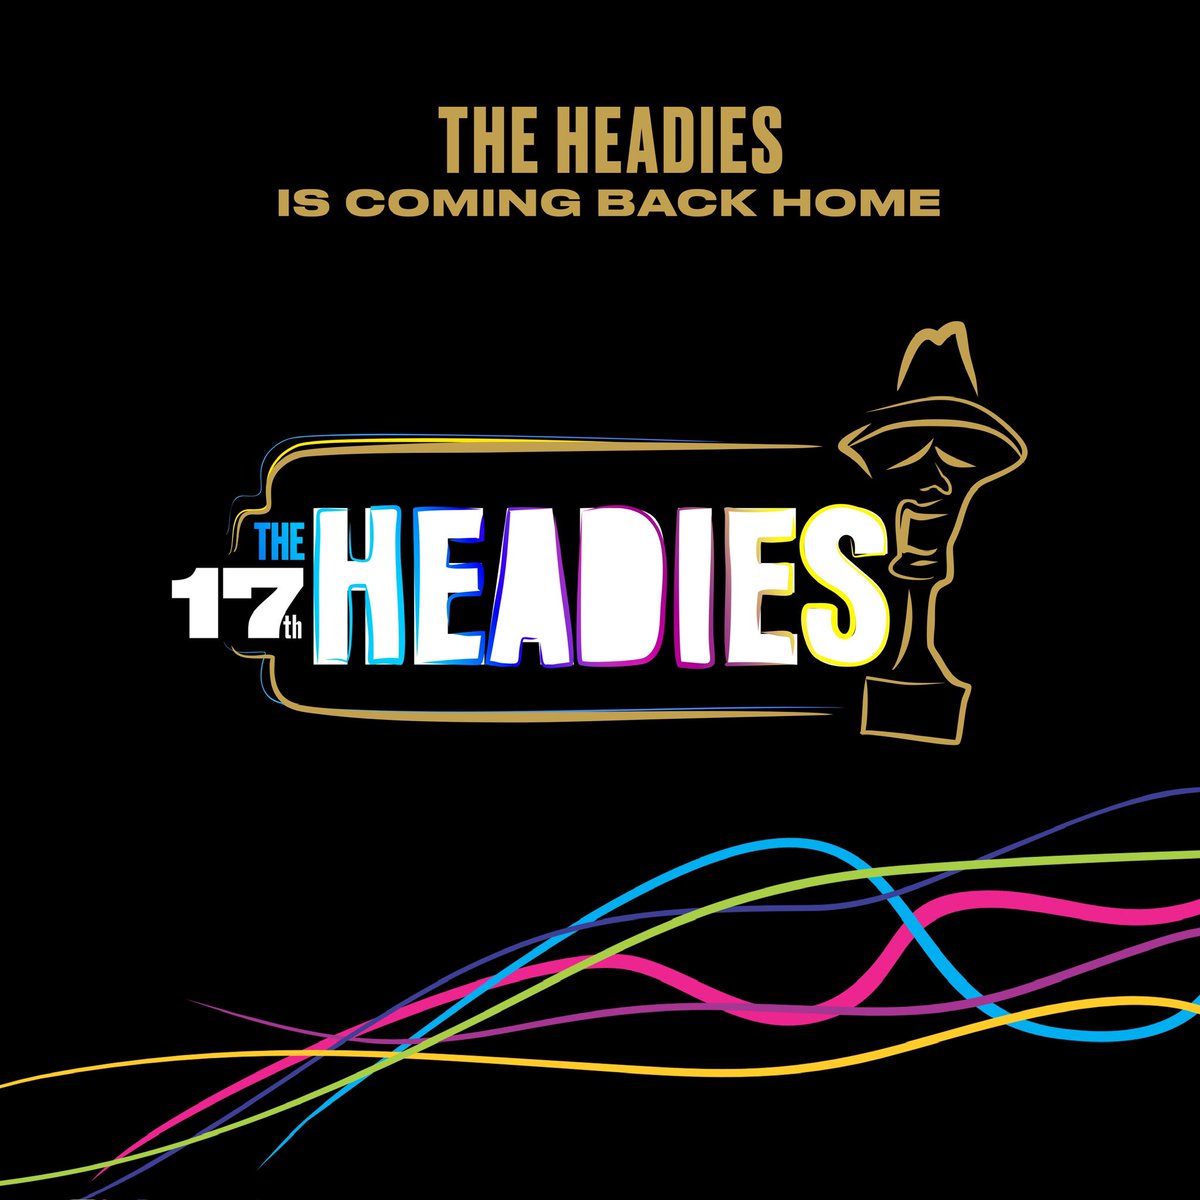 Happy to announce that the #17thHeadies will be happening Live in Nigeria!